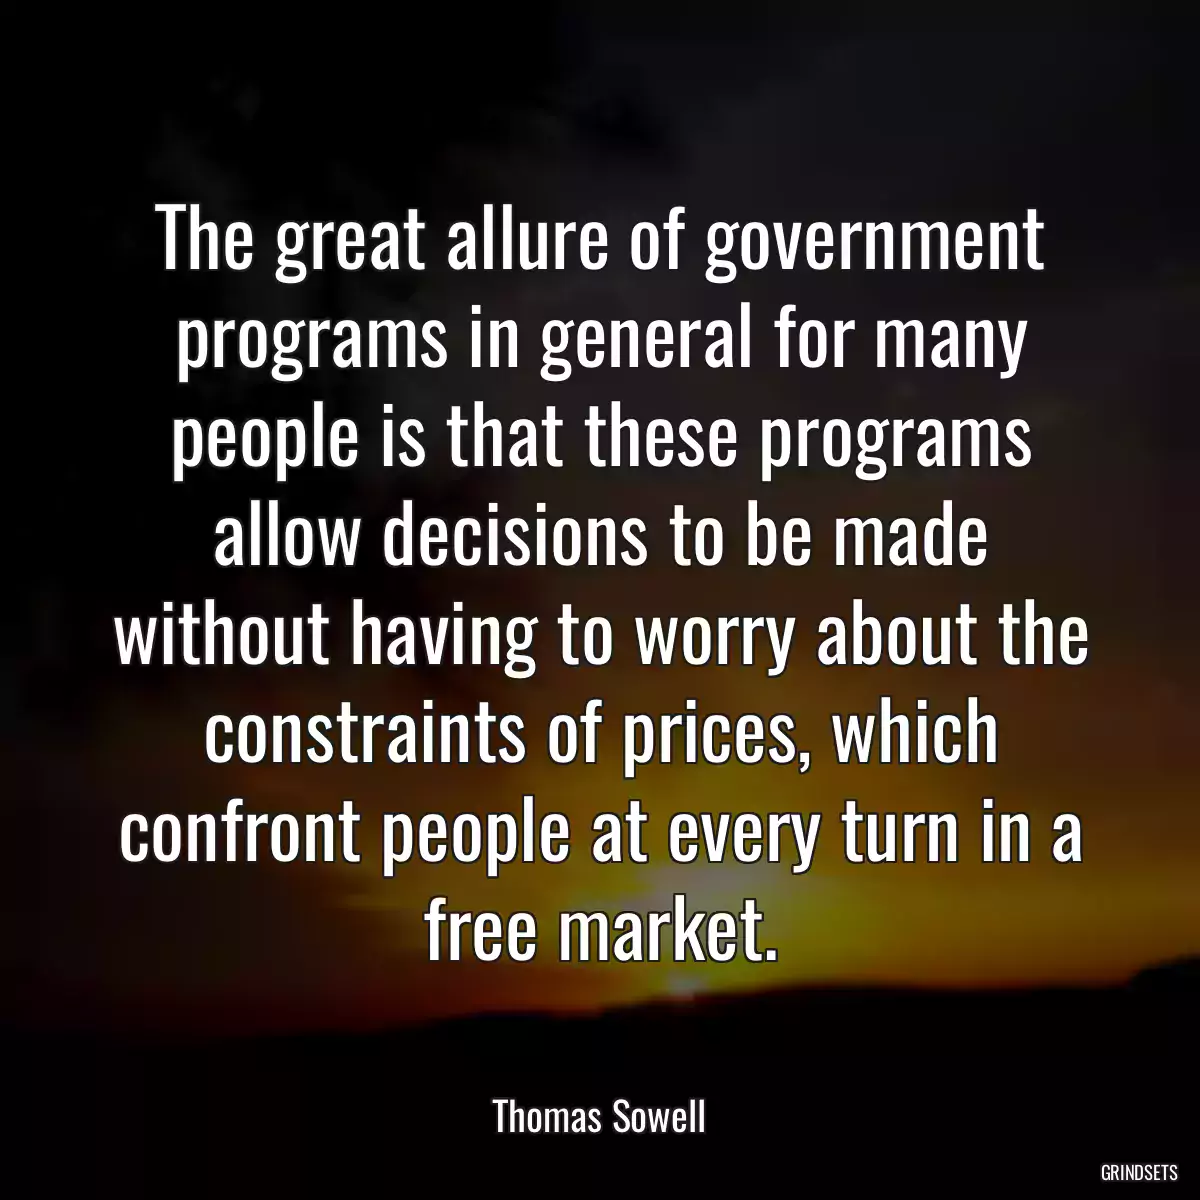 The great allure of government programs in general for many people is that these programs allow decisions to be made without having to worry about the constraints of prices, which confront people at every turn in a free market.